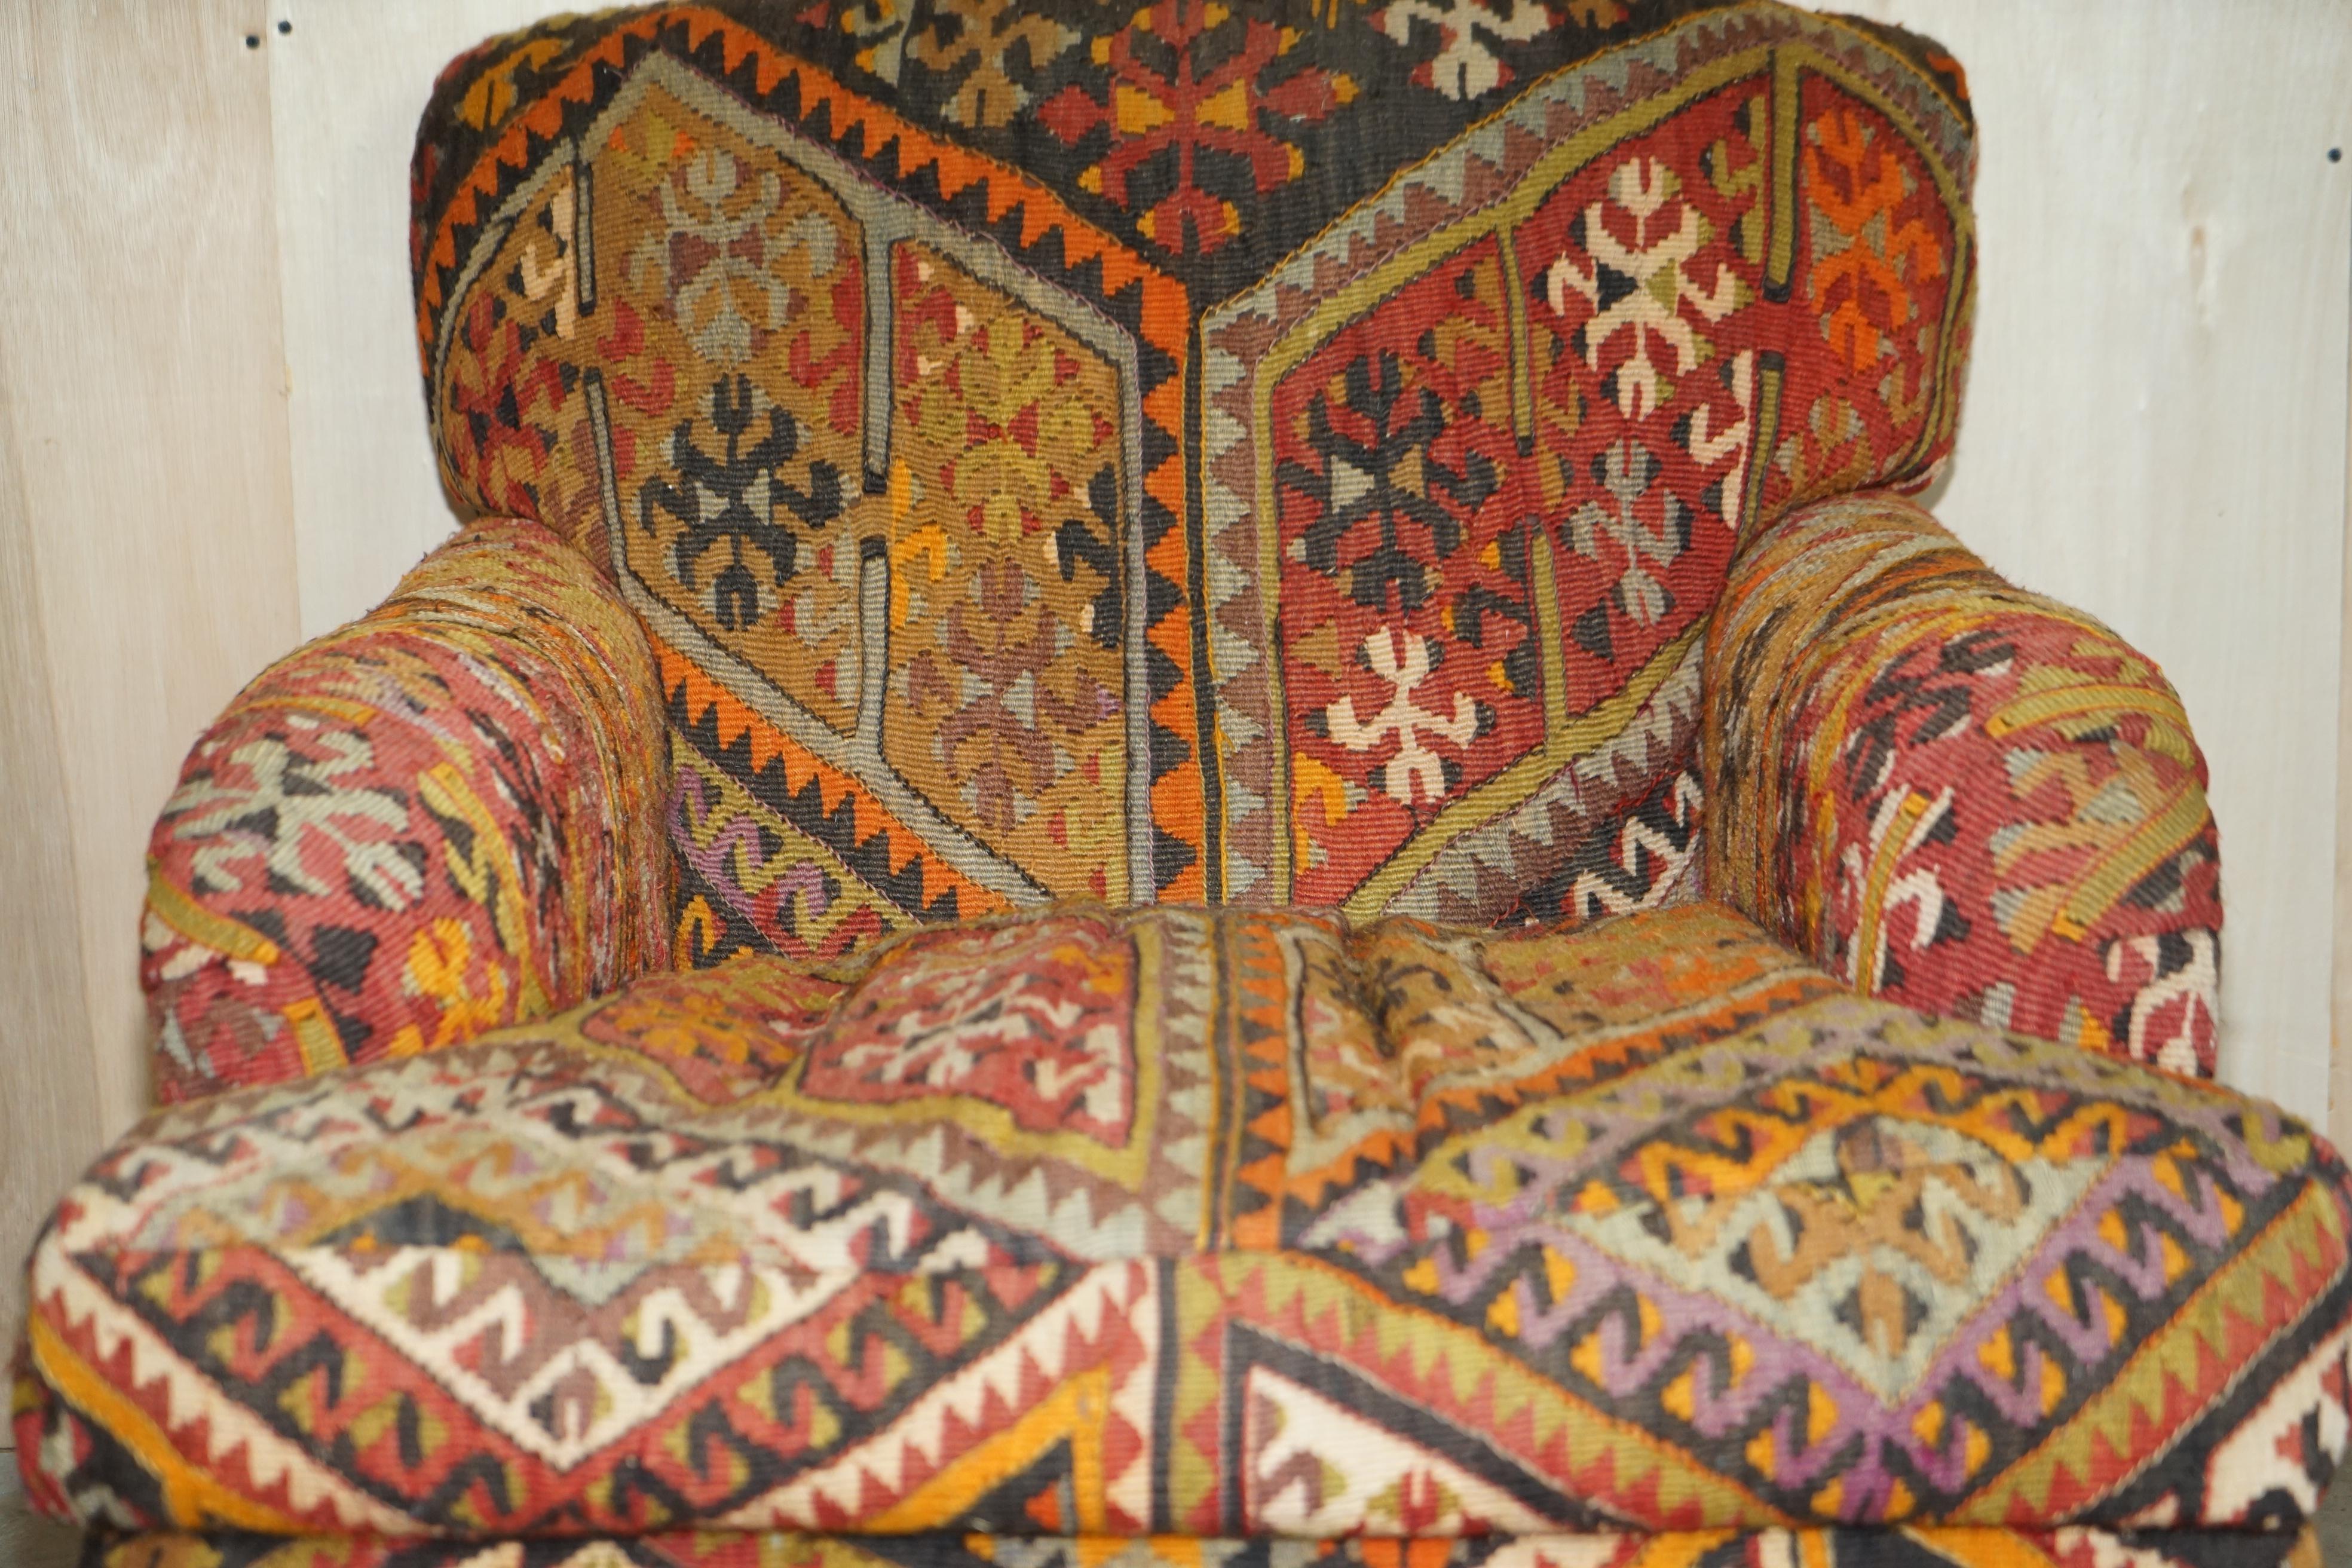 Hand-Crafted Vintage George Smith Kilim Upholstered Armchair with Feather Cushion